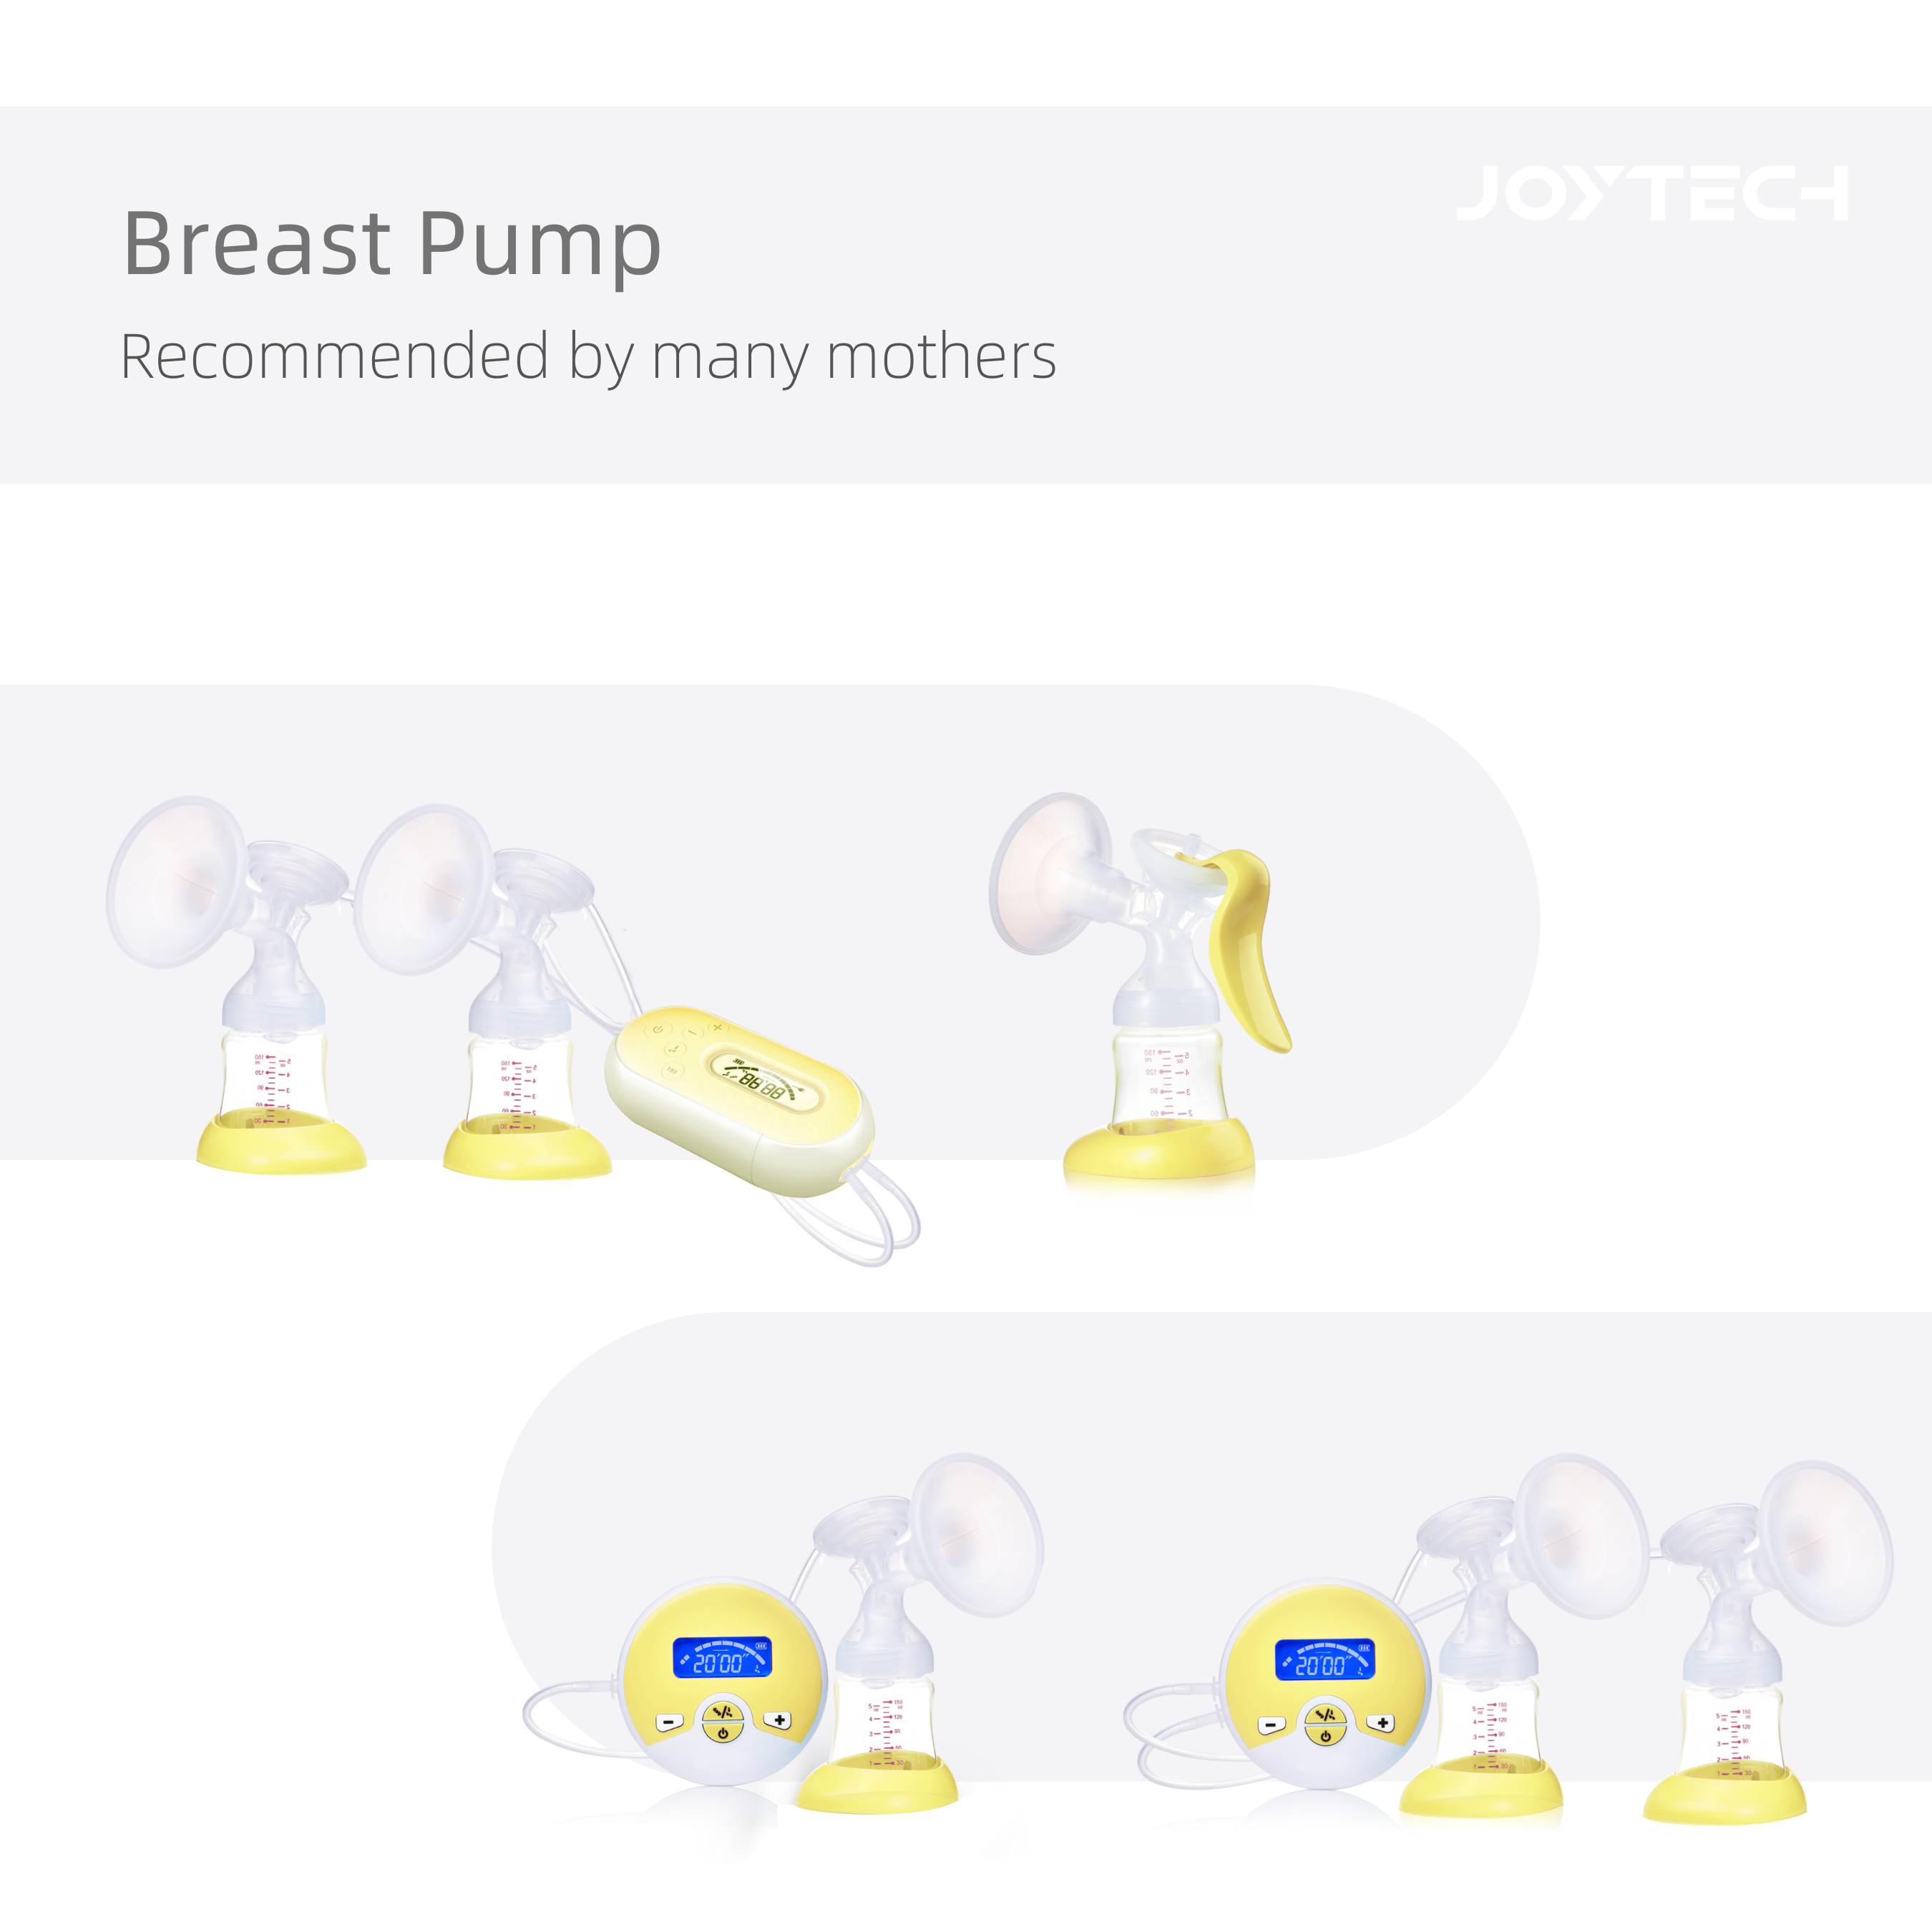 Why do you need a breast pump?